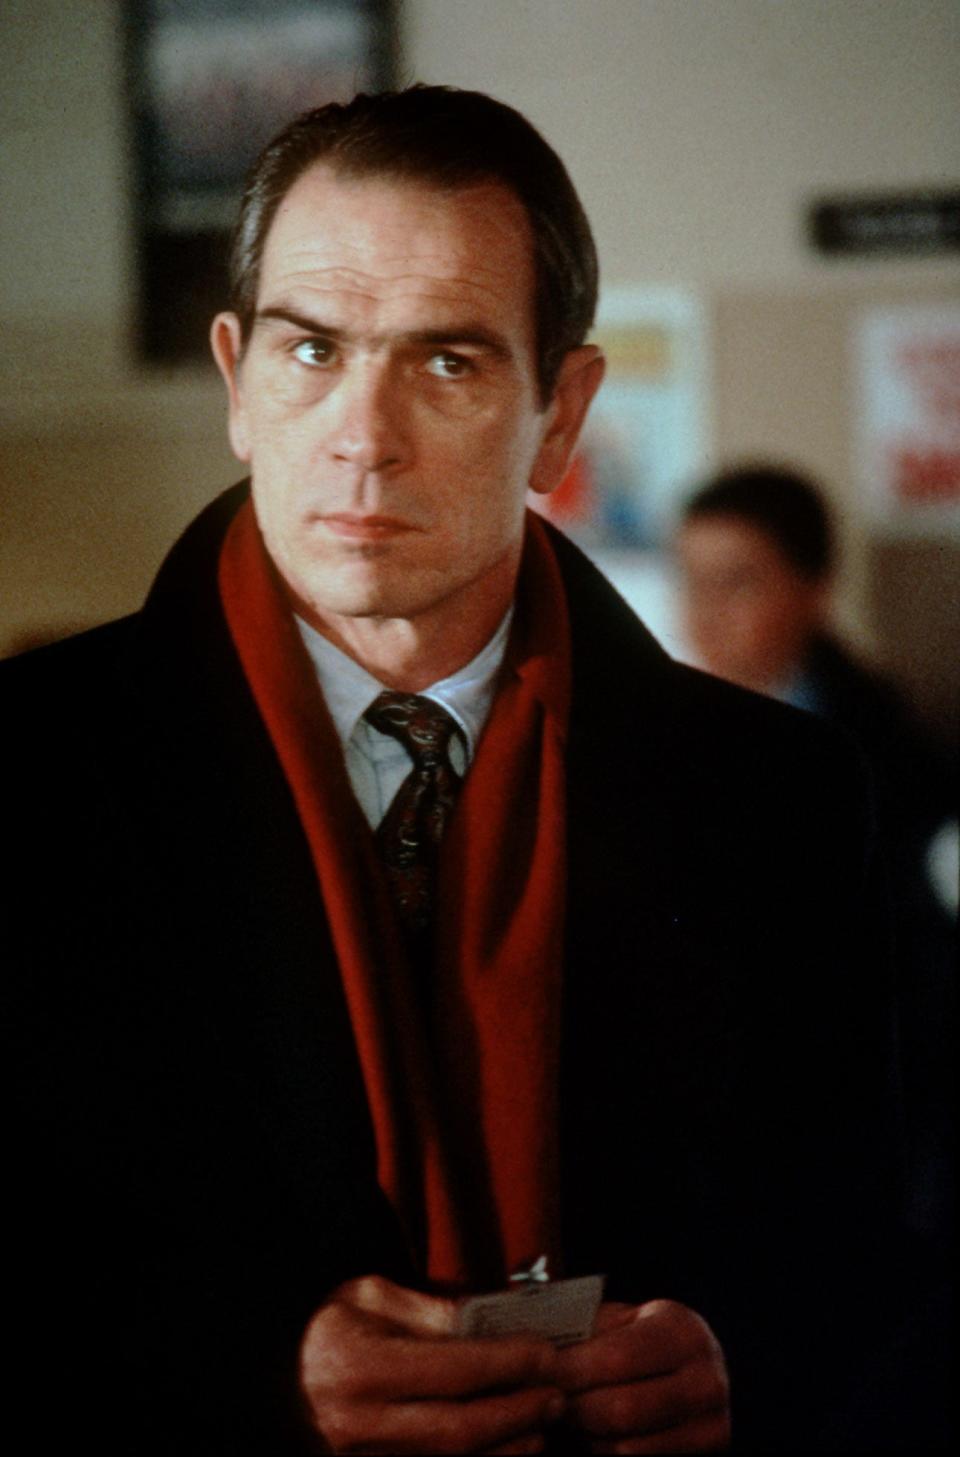 Tommy Lee Jones played a seasoned, ornery U.S. Marshall in "The Fugitive," as seen in this Gannett file photo.